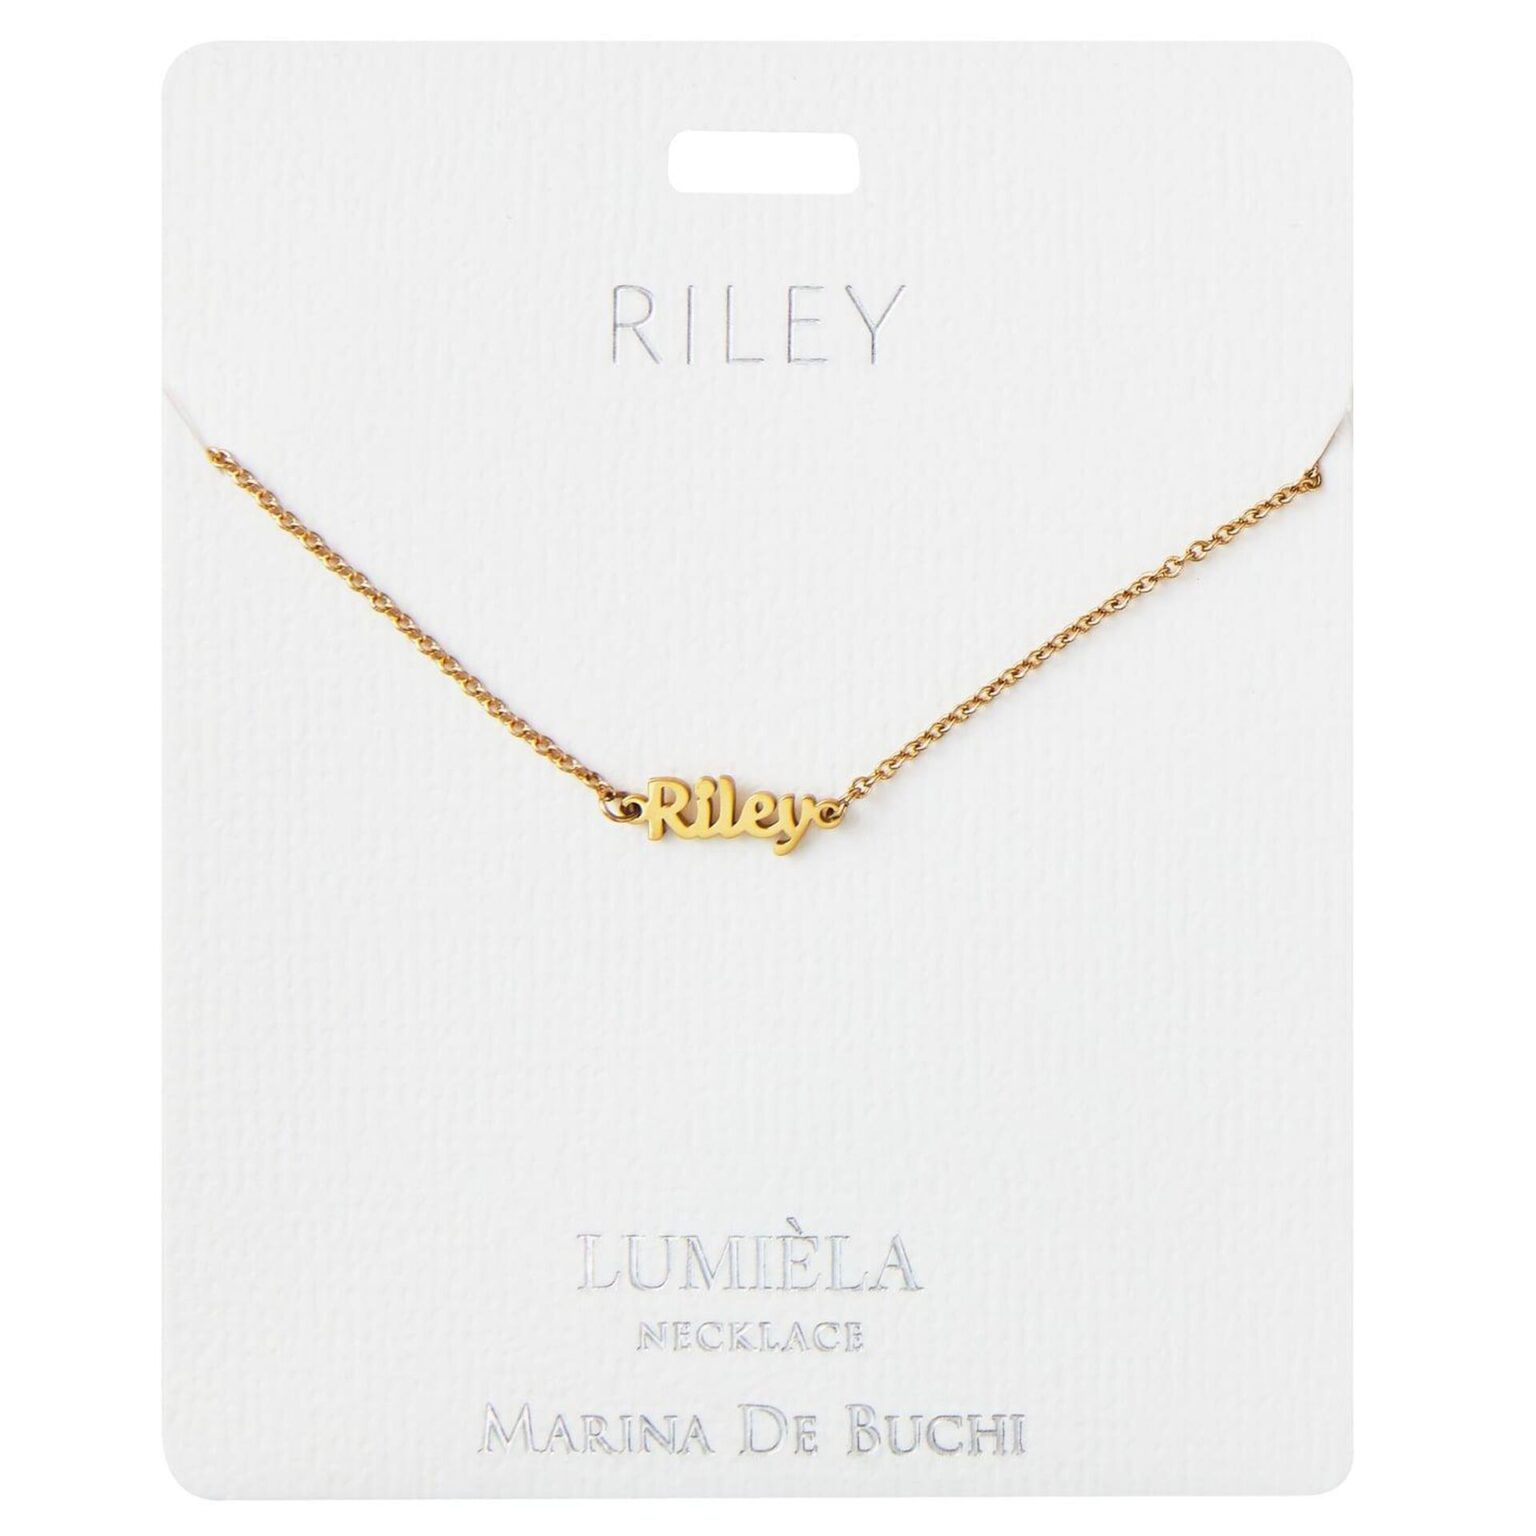 LUMIELA PERSONALIZED NAME NECKLACES - Buckley's Drug Store ...